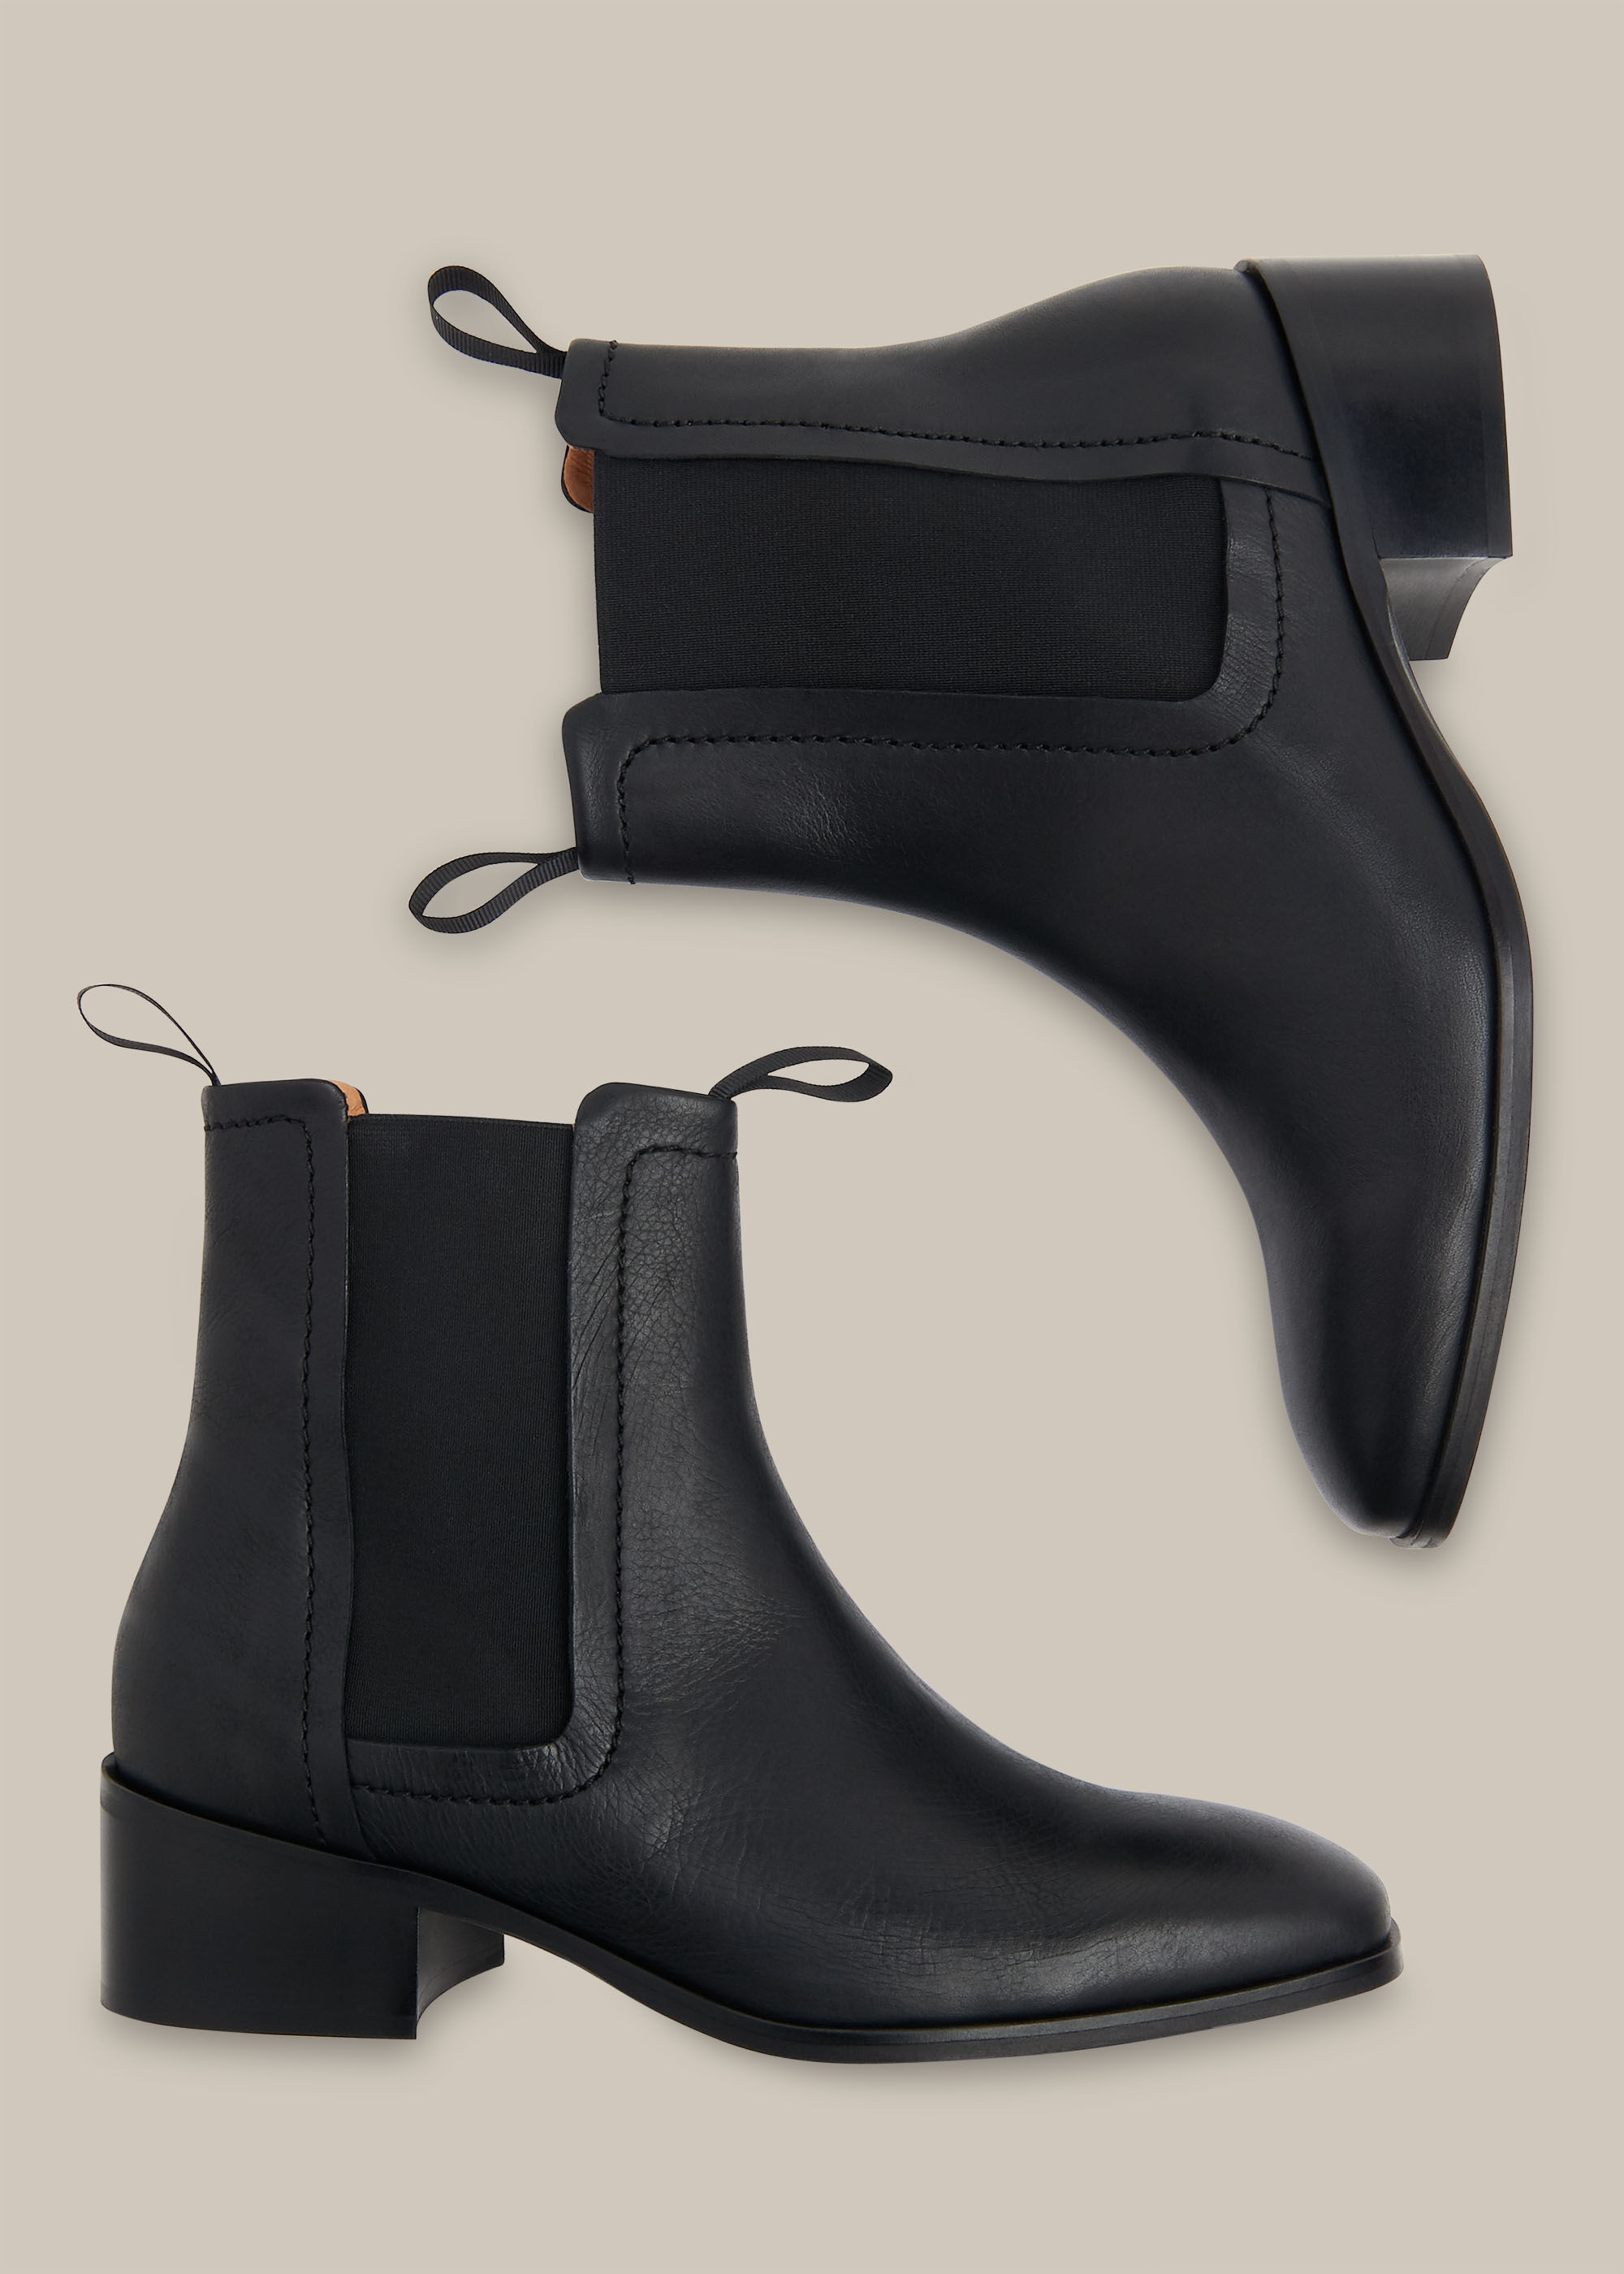 whistles fernbrook ankle boots black